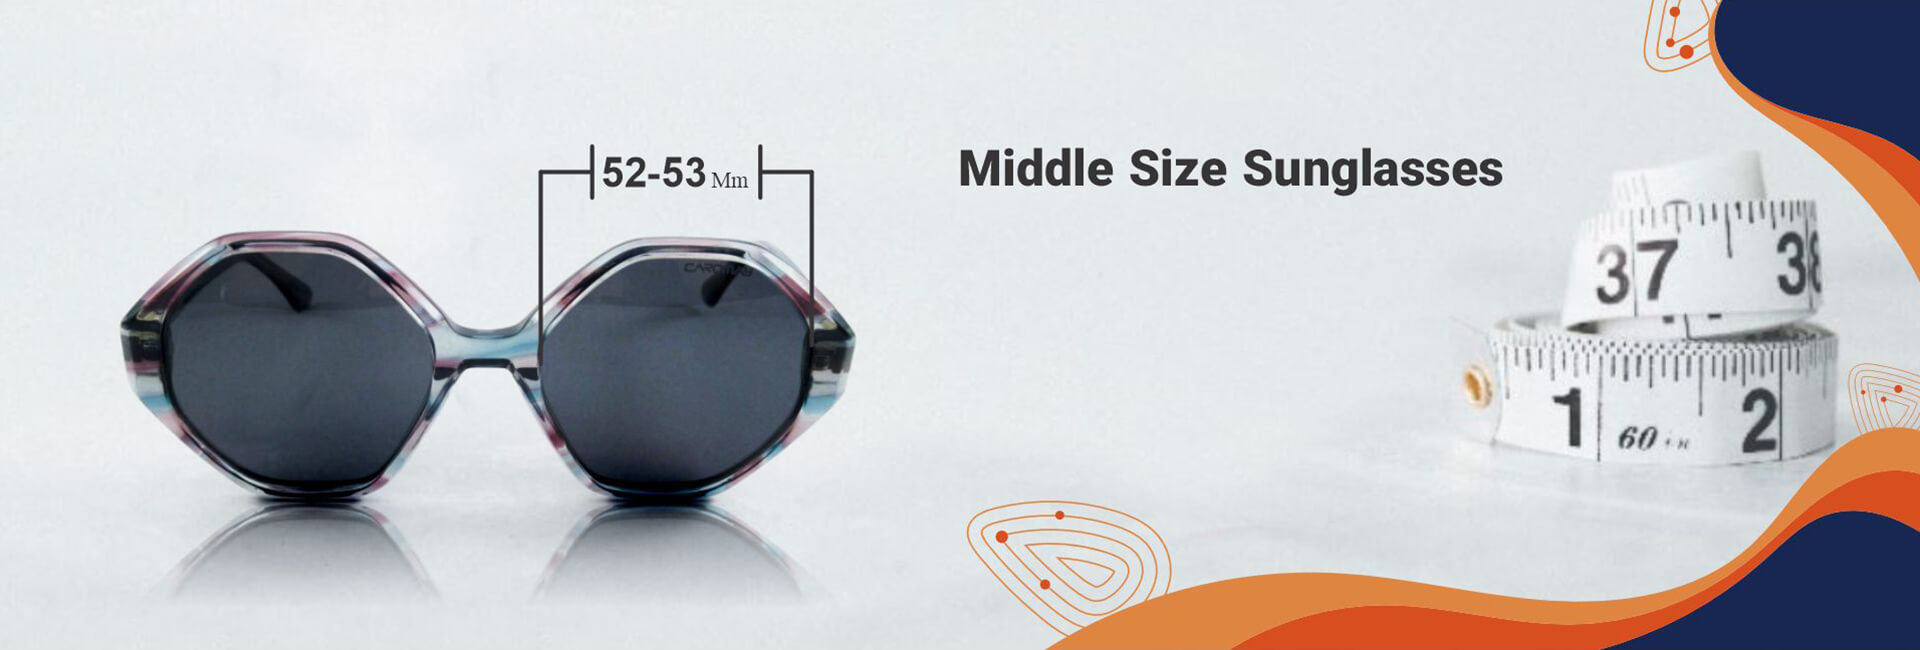 middle size sunglasses